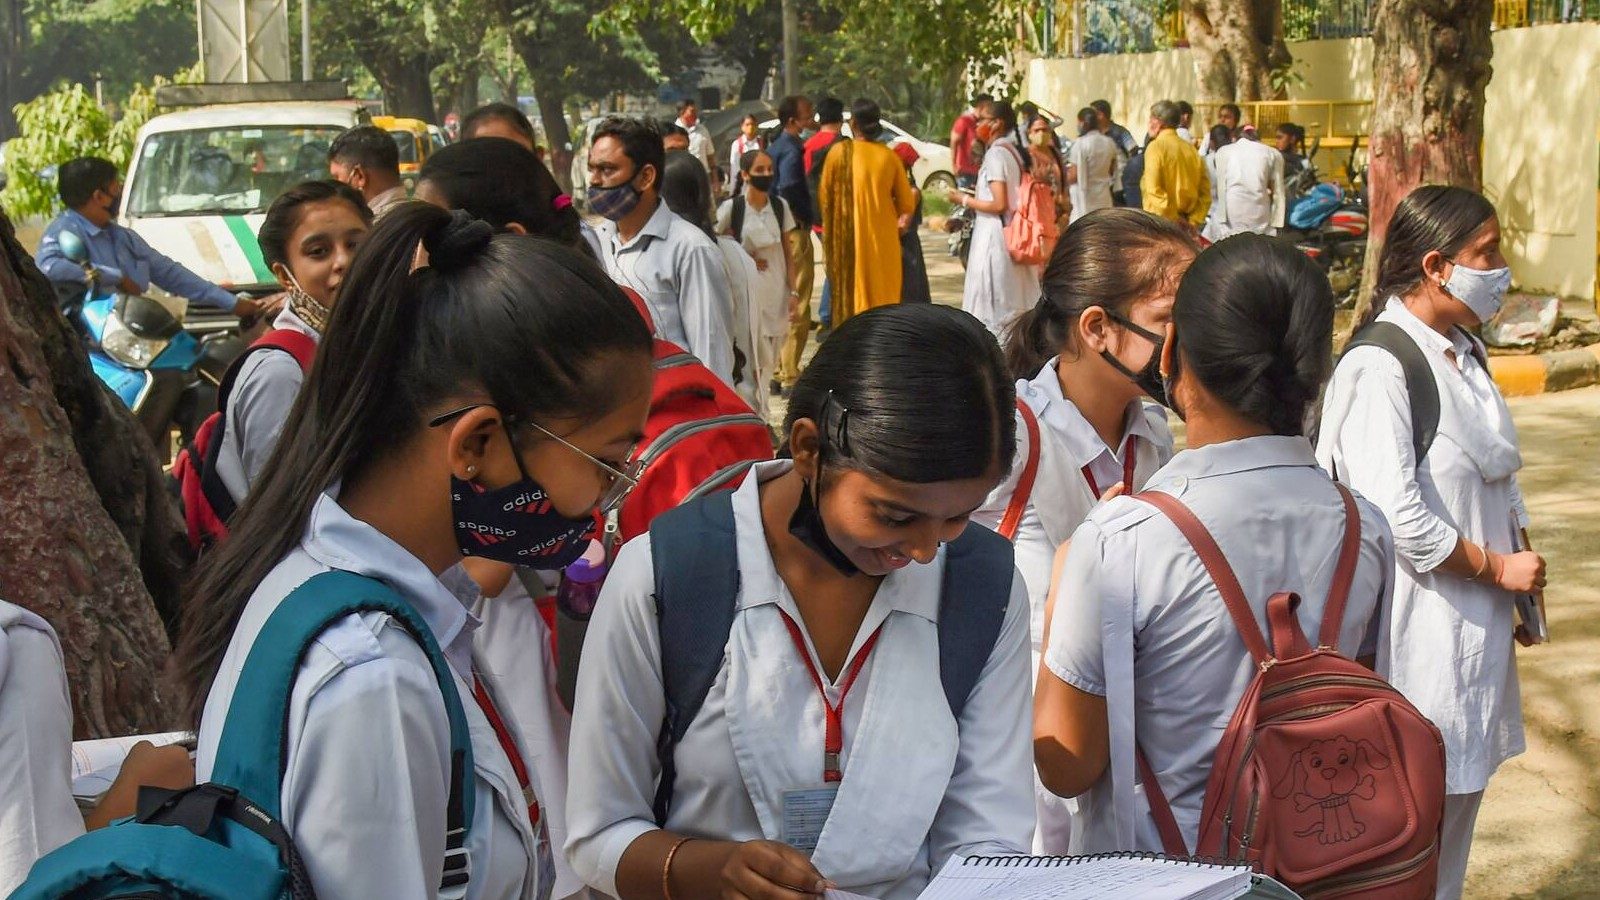 CISCE publishes model papers for ICSE, ISC Board exams, check how to download links